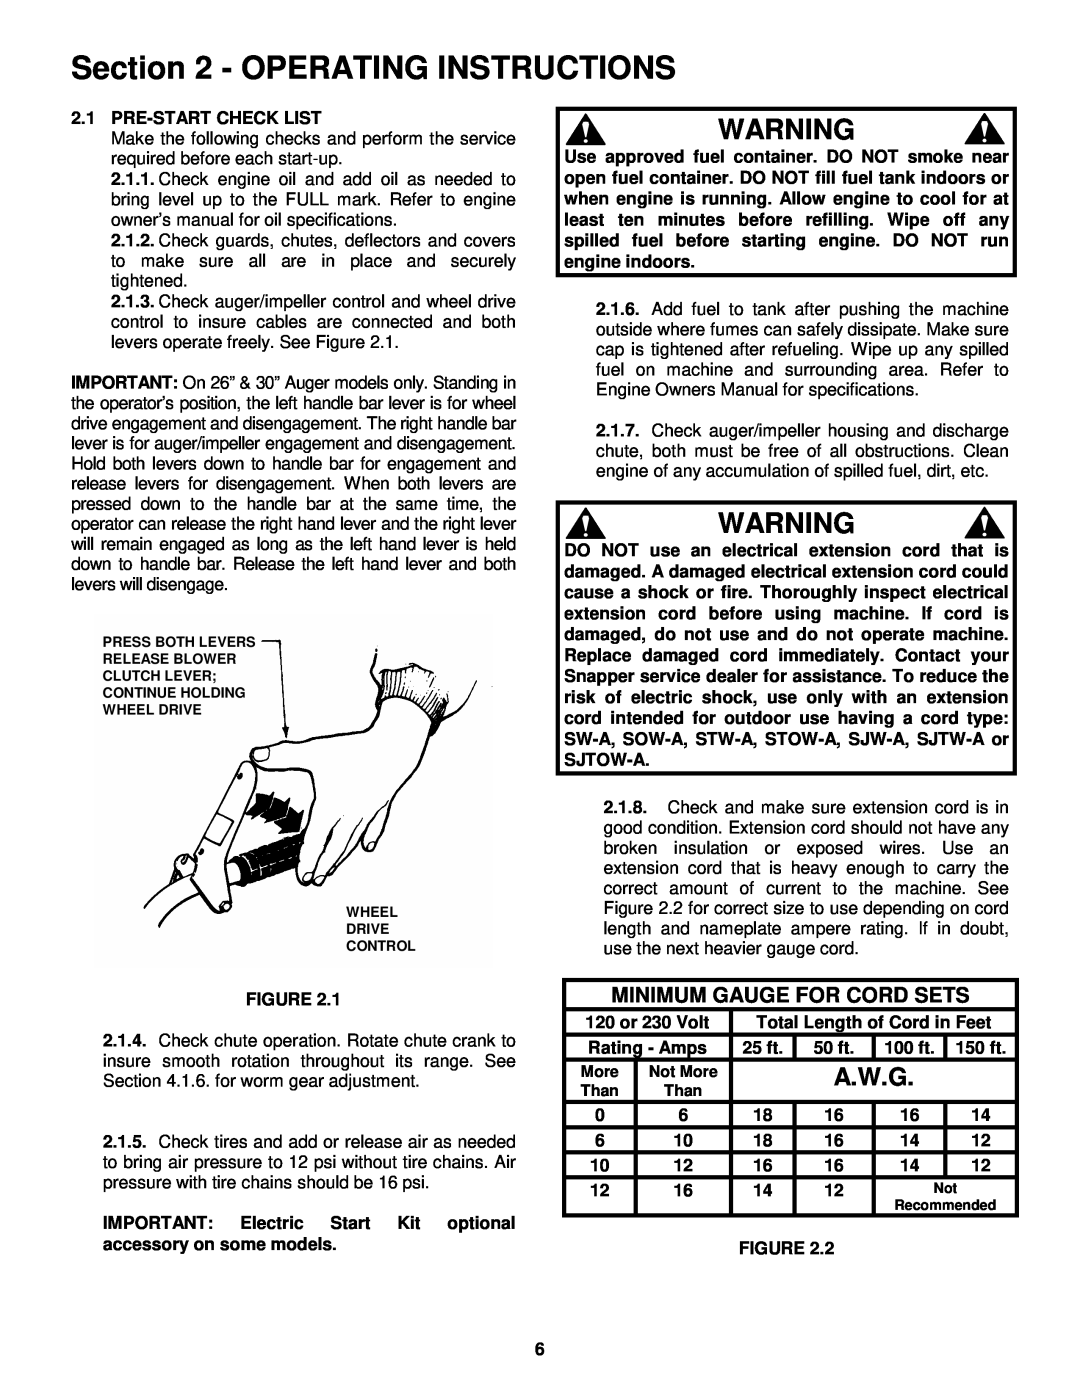 Snapper 8246, 9266E, 11306, 9266 important safety instructions A.W.G, Operating Instructions, Minimum Gauge For Cord Sets 